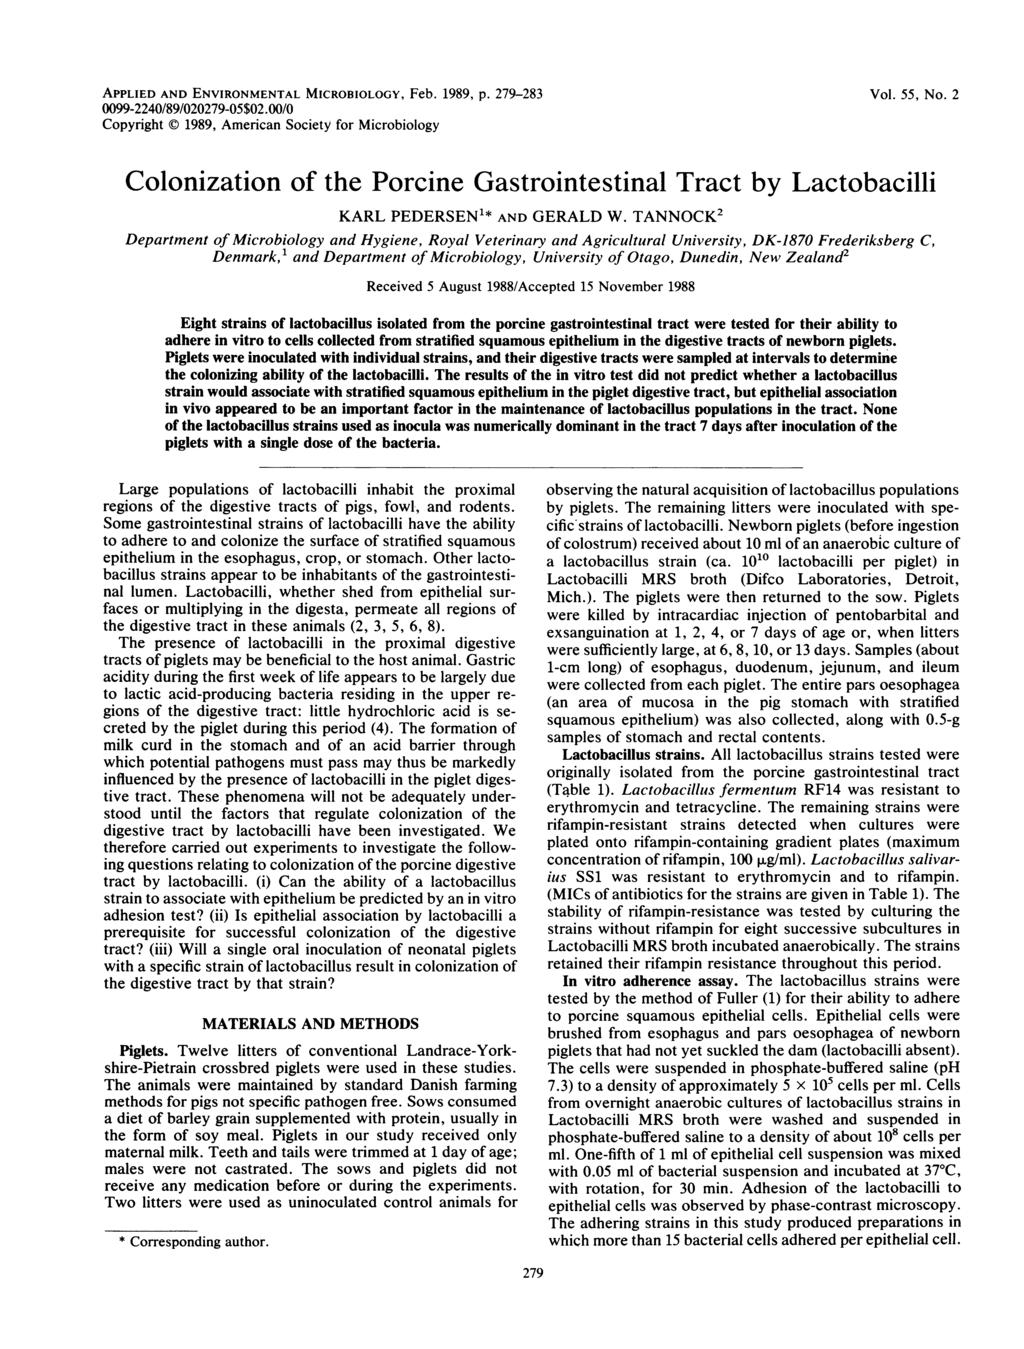 APPLIED AND ENVIRONMENTAL MICROBIOLOGY, Feb. 1989, p. 279-283 0099-2240/89/020279-05$02.00/0 Copyright C) 1989, American Society for Microbiology Vol. 55, No.